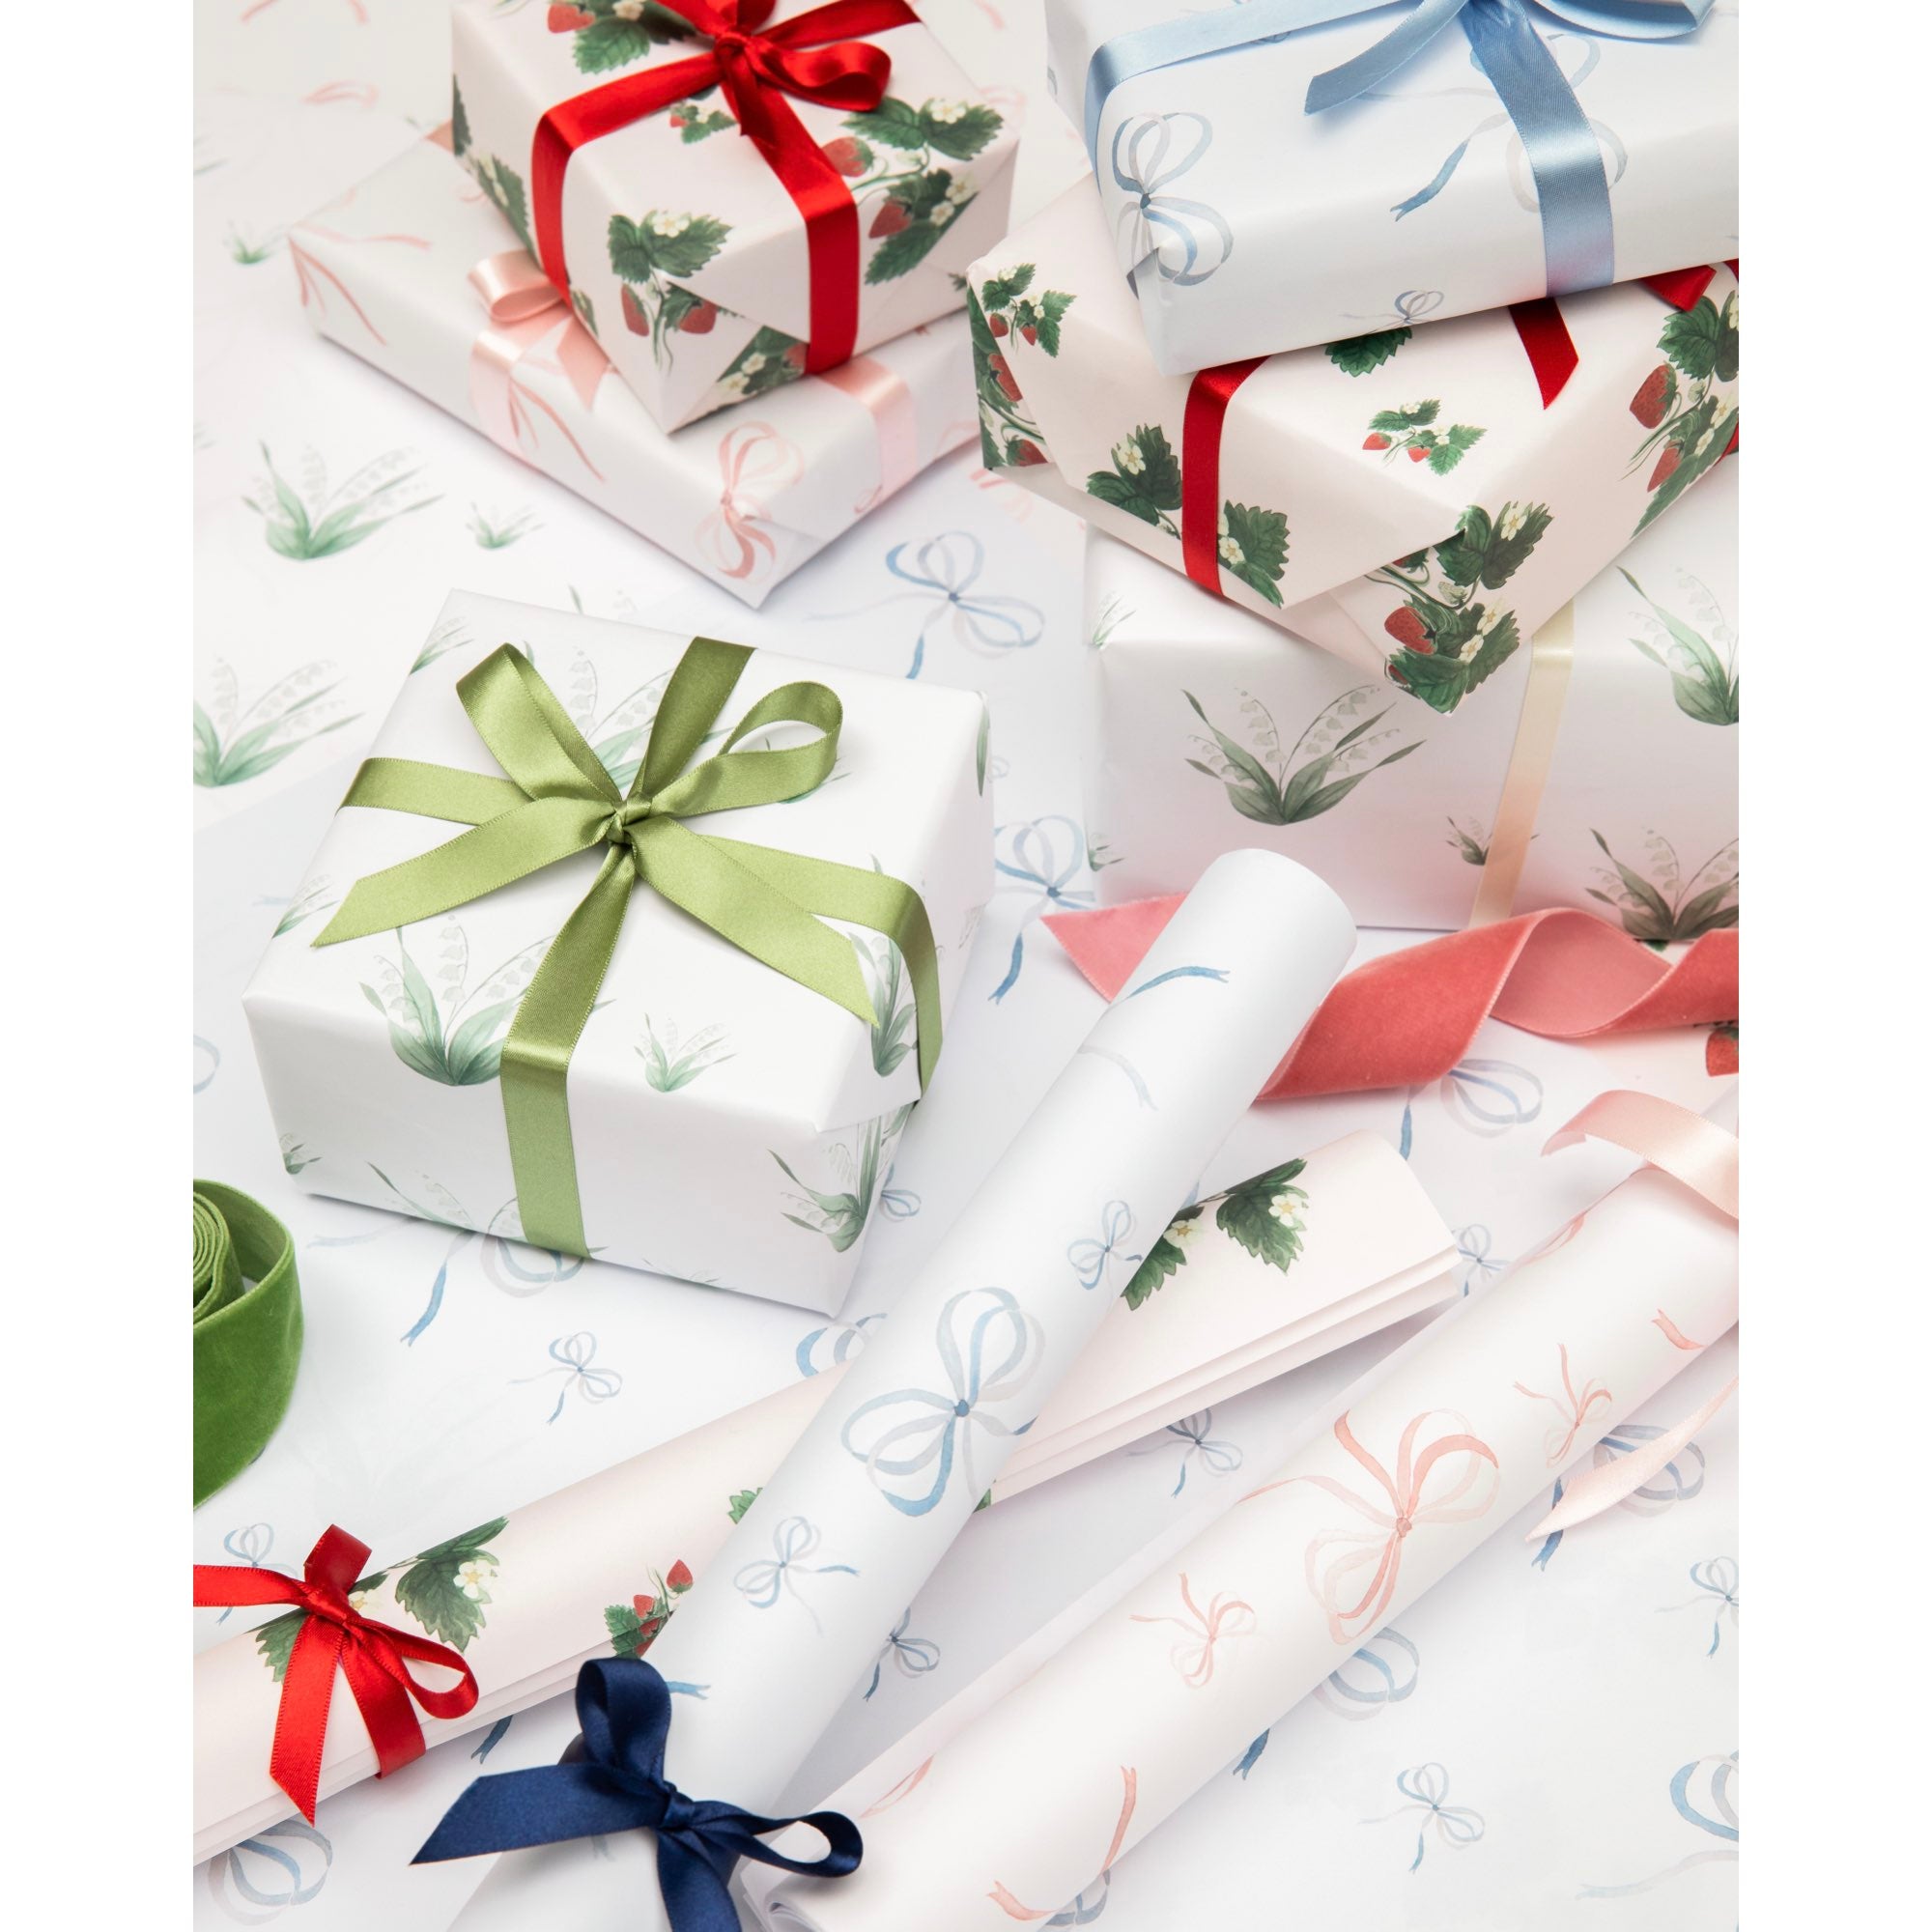 Wrapping paper by Memo Press